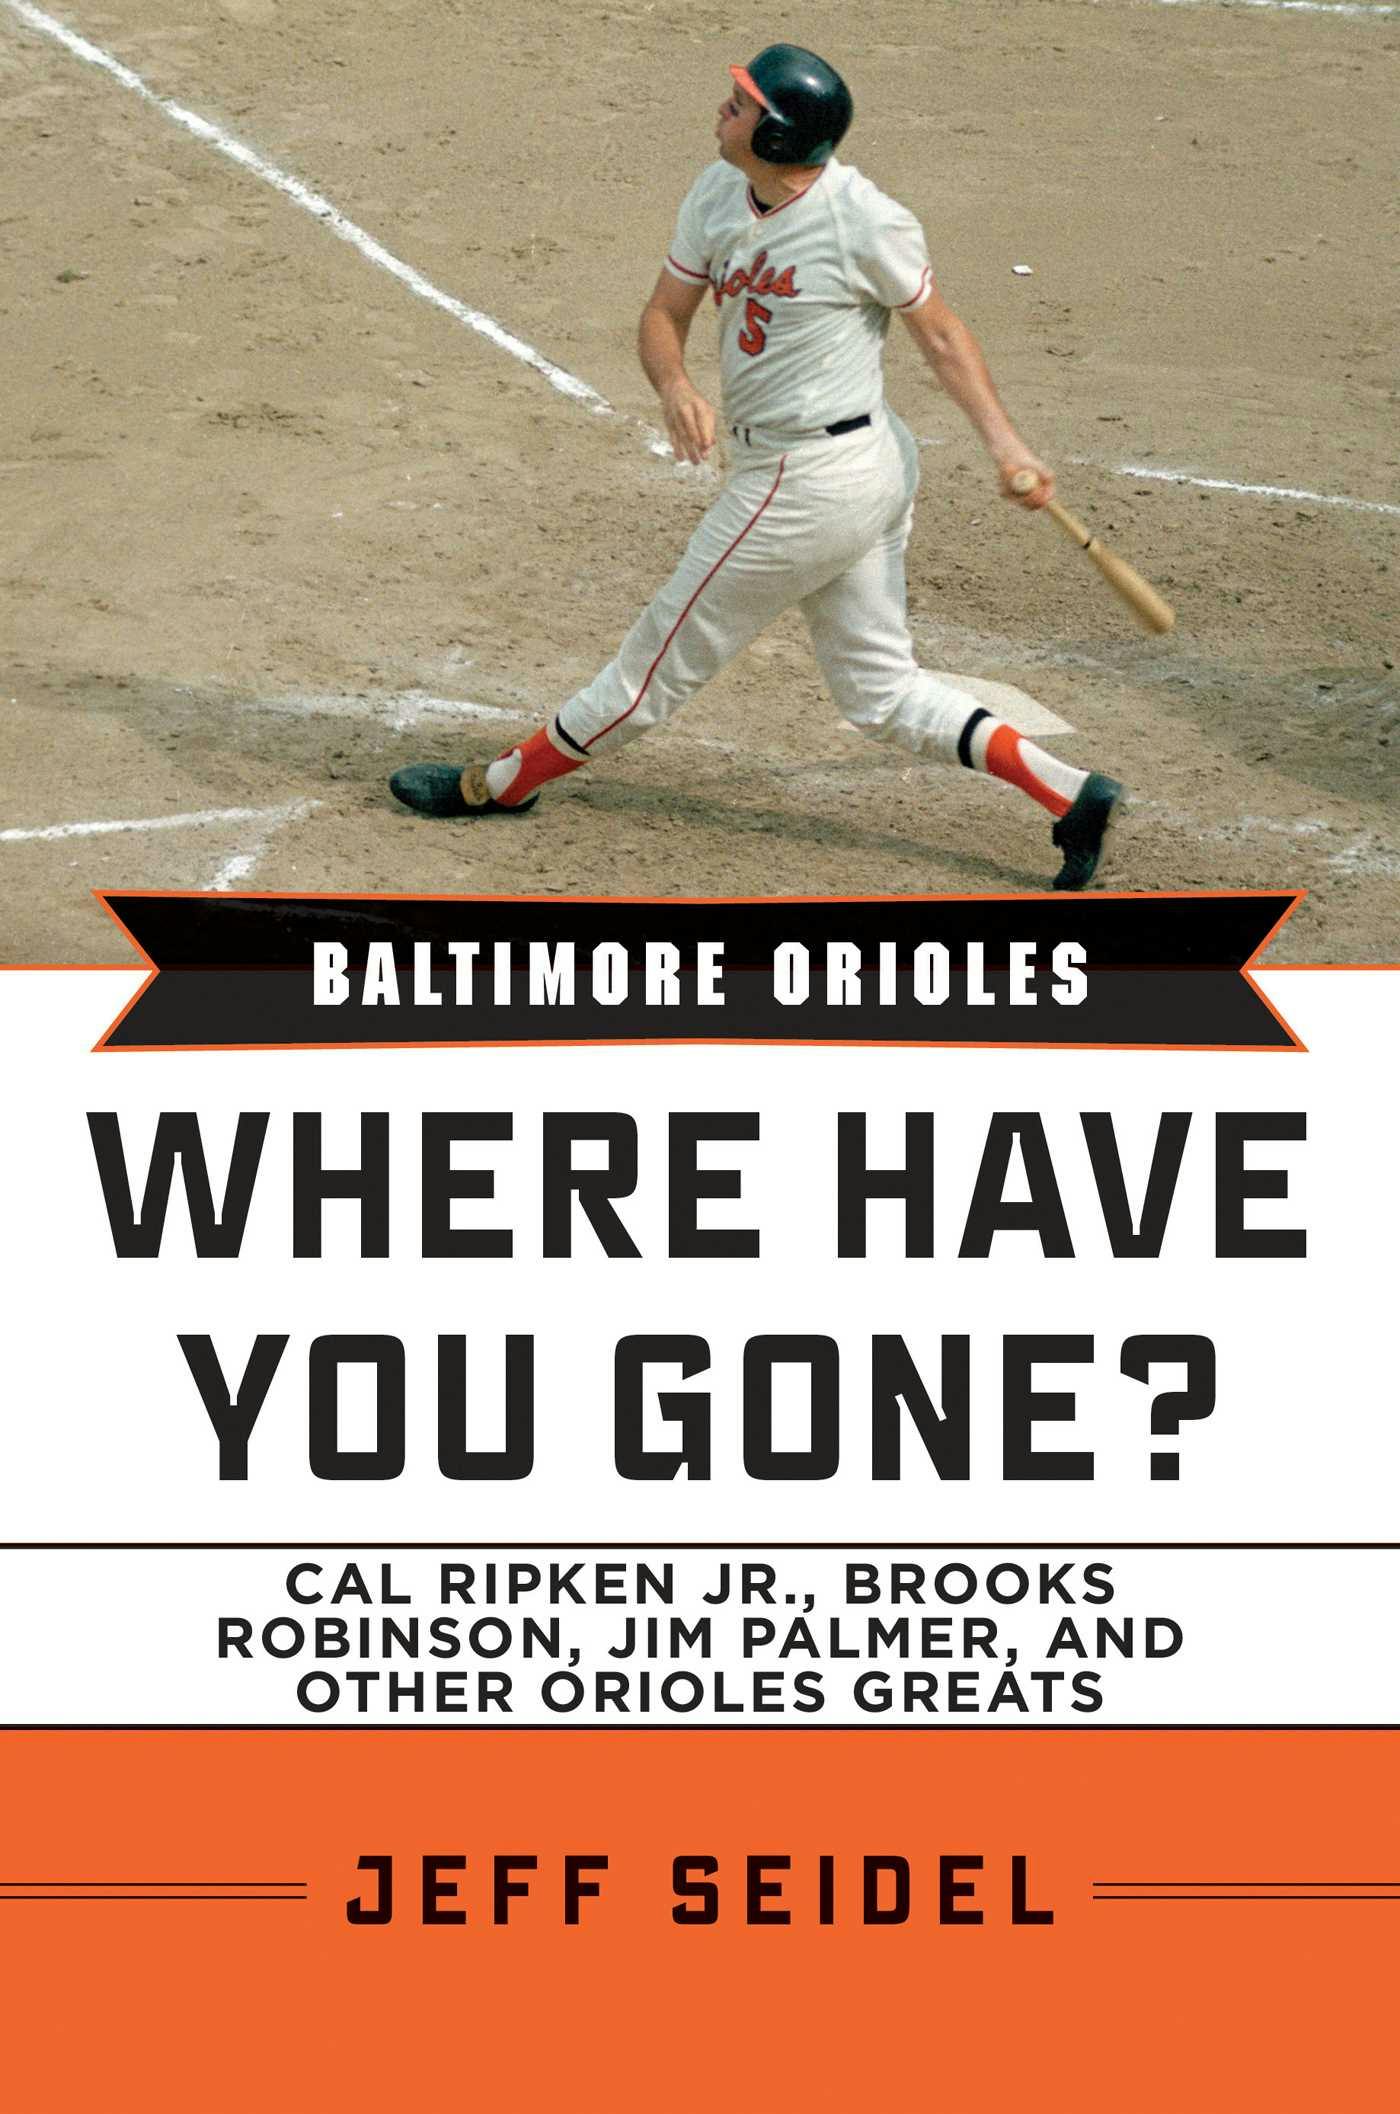 Baltimore Orioles: Where Have You Gone? Cal Ripken Jr., Brooks Robinson, Jim Palmer, and Other Orioles Greats - undefined